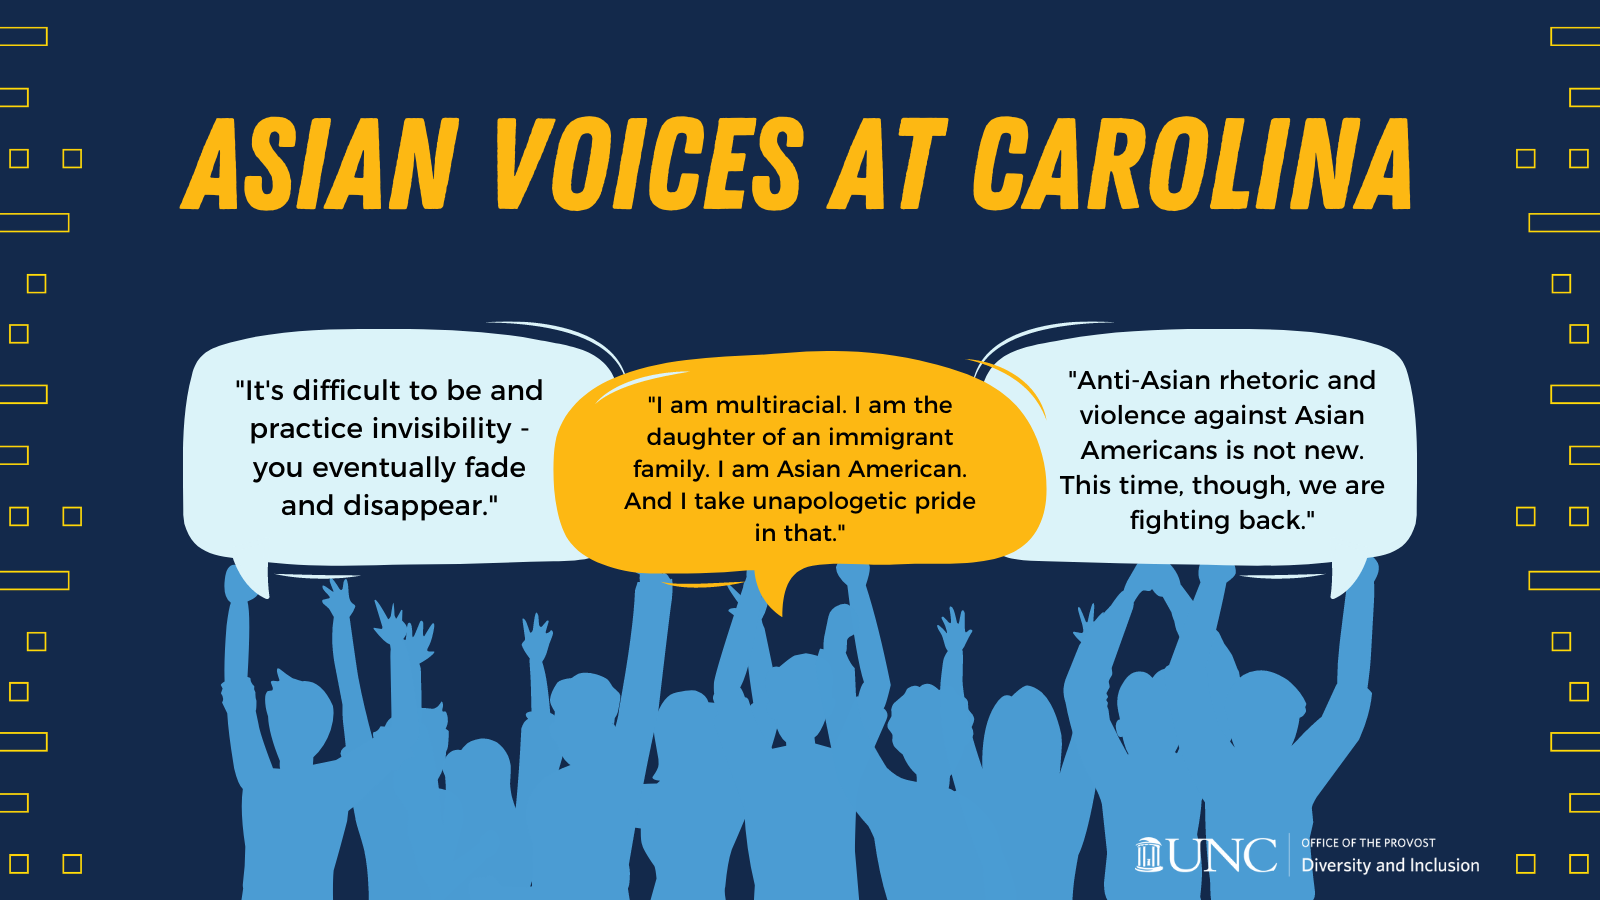 Image of people holding up voice bubbles with title that says "Asian Voices at Carolina" and comments that say, "It's difficult to be and practice invisibility - you eventually fade and disappear," "I am multiracial. I am the daughter of an immigrant family. I am Asian American. And I take unapologetic pride in that," and "Anti-Asian rhetoric and violence against Asian Americans is not new. This time, though we are fighting back."